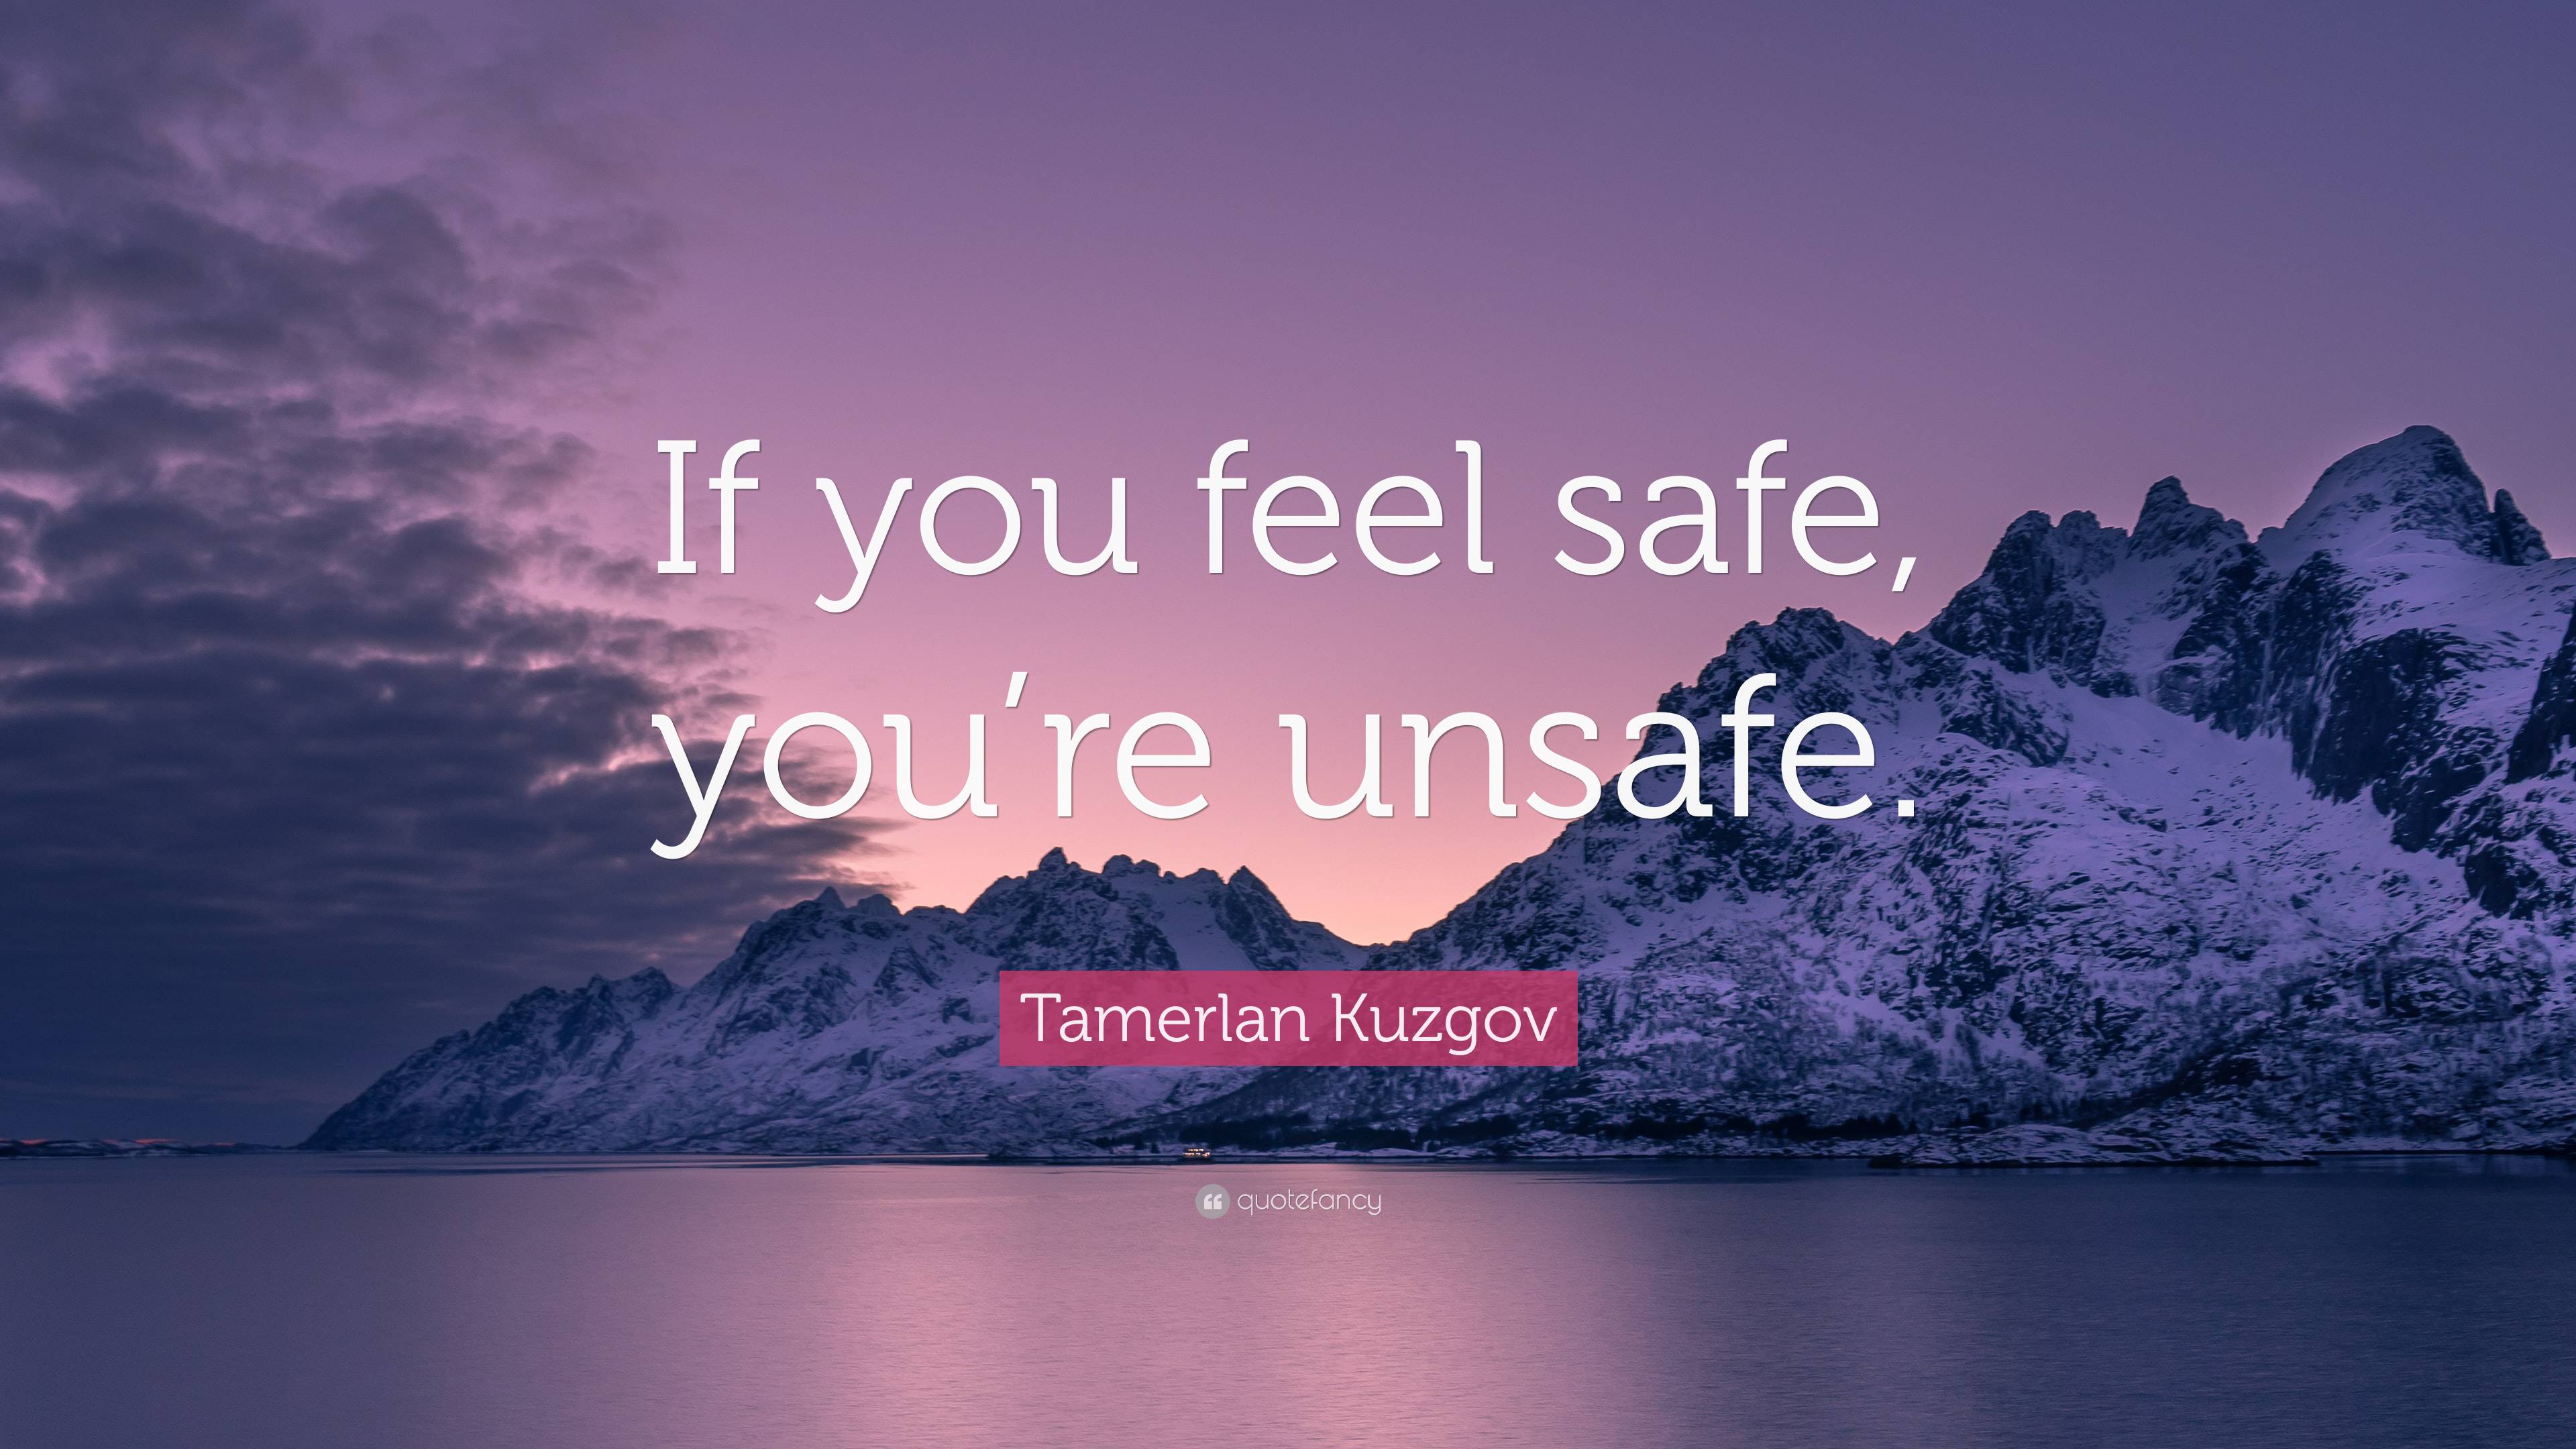 Tamerlan Kuzgov Quote: “If you feel safe, you’re unsafe.”